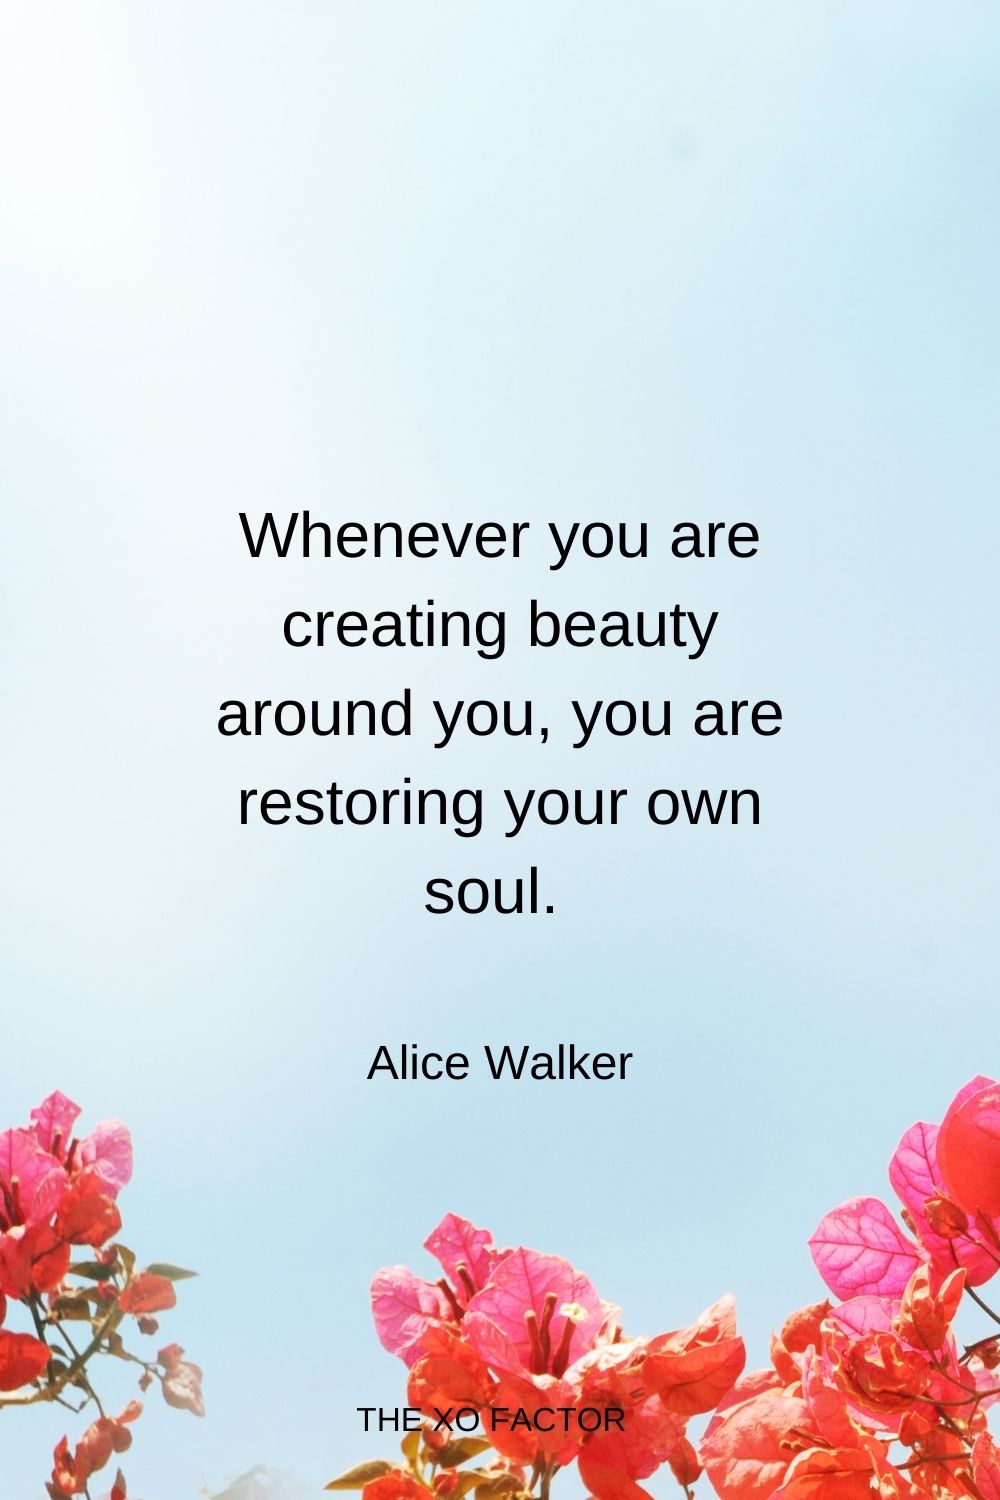 Whenever you are creating beauty around you, you are restoring your own soul.  Alice Walker